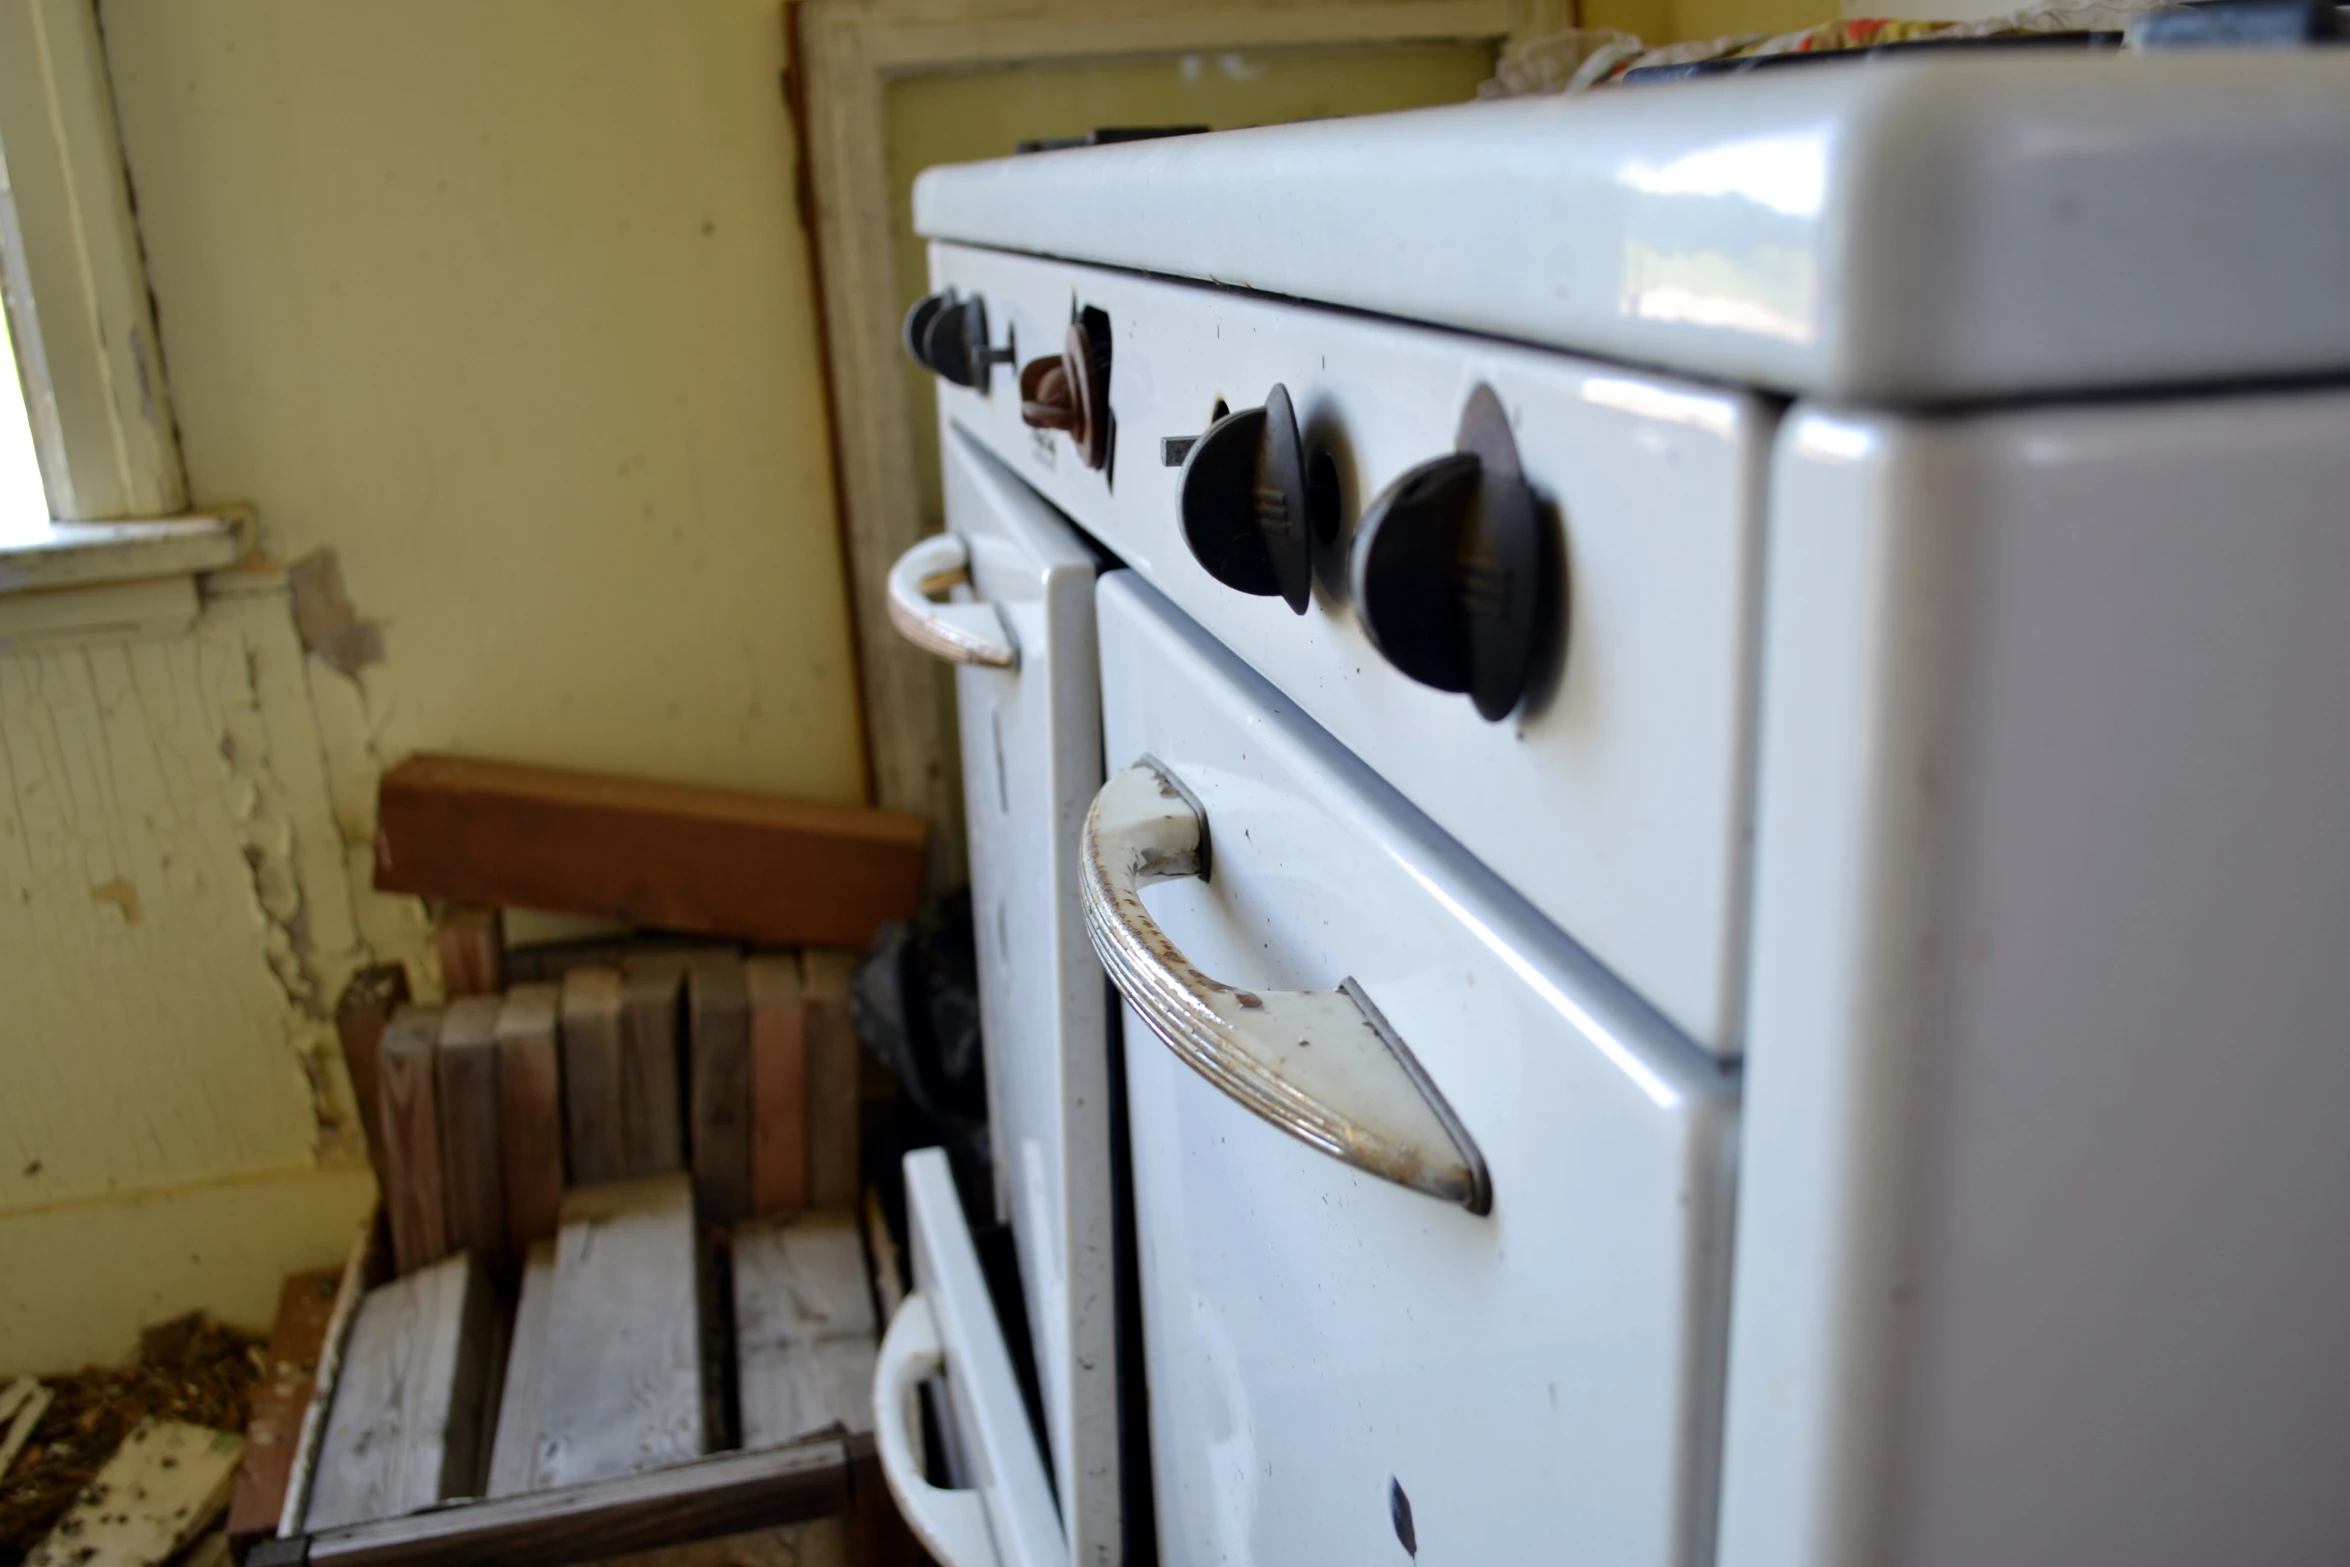 an old stove with rusted handles in an old kitchen